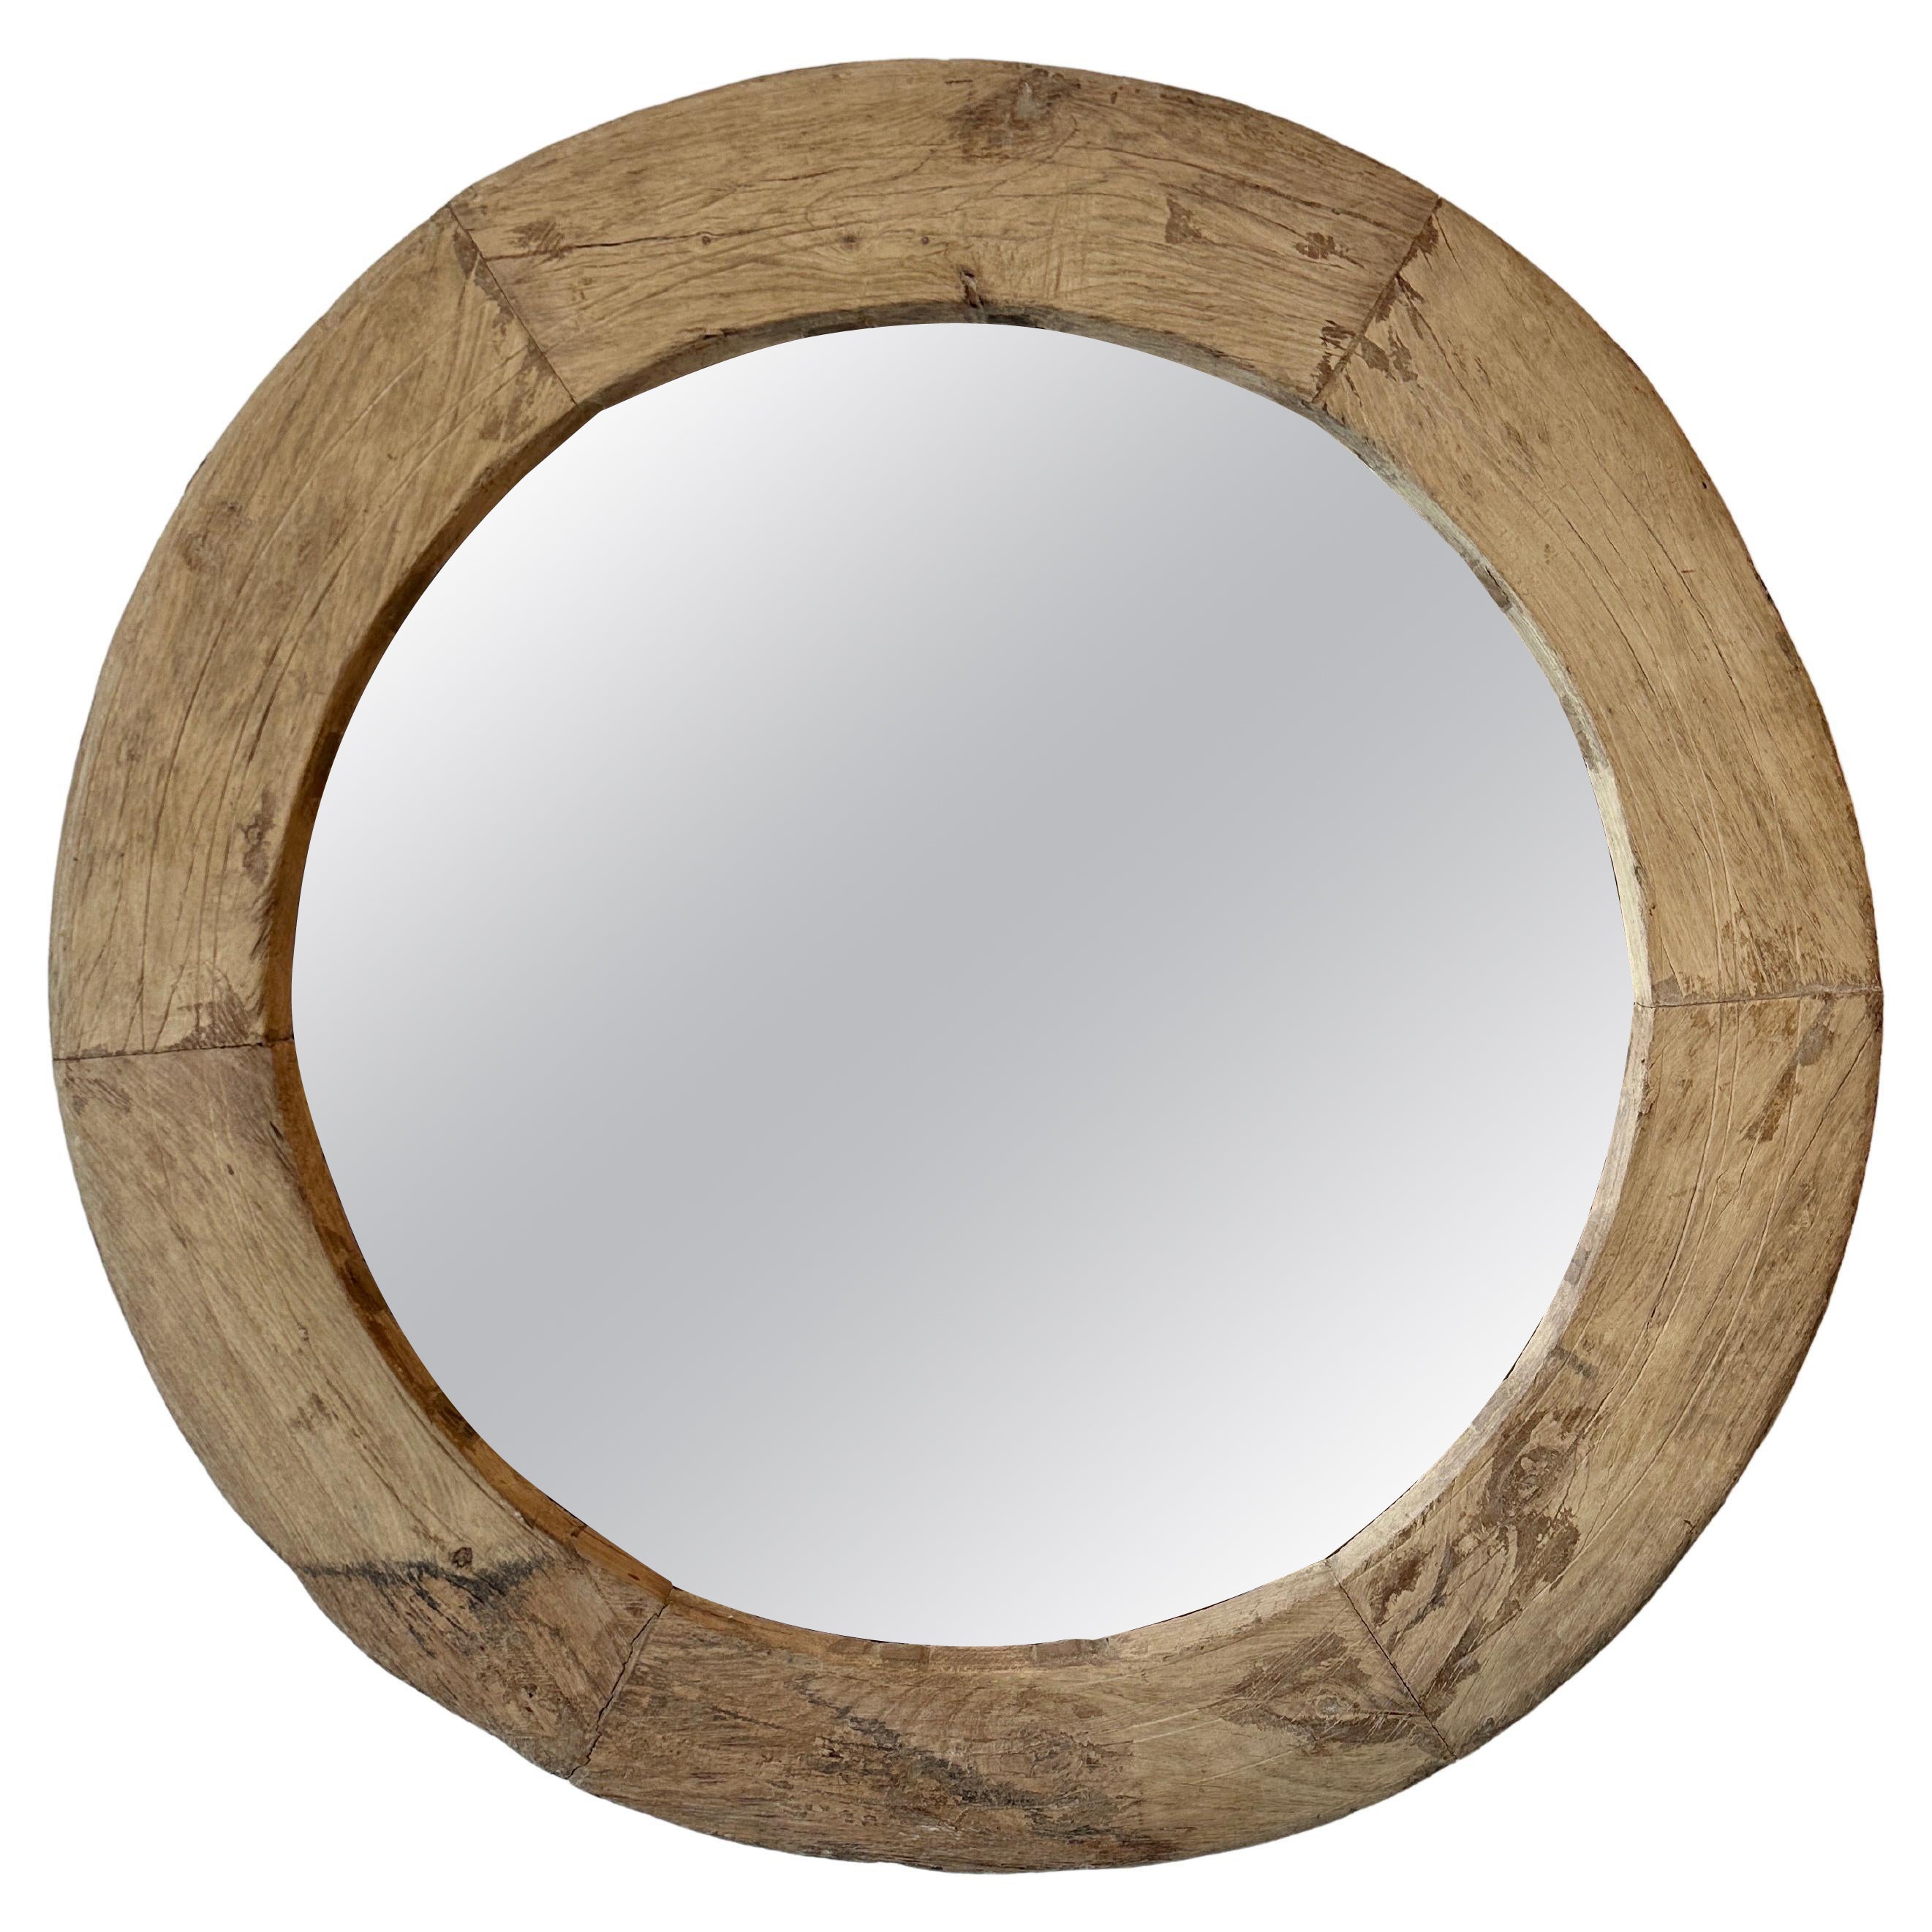 Rustic Oversized Wood Framed Mirror For Sale